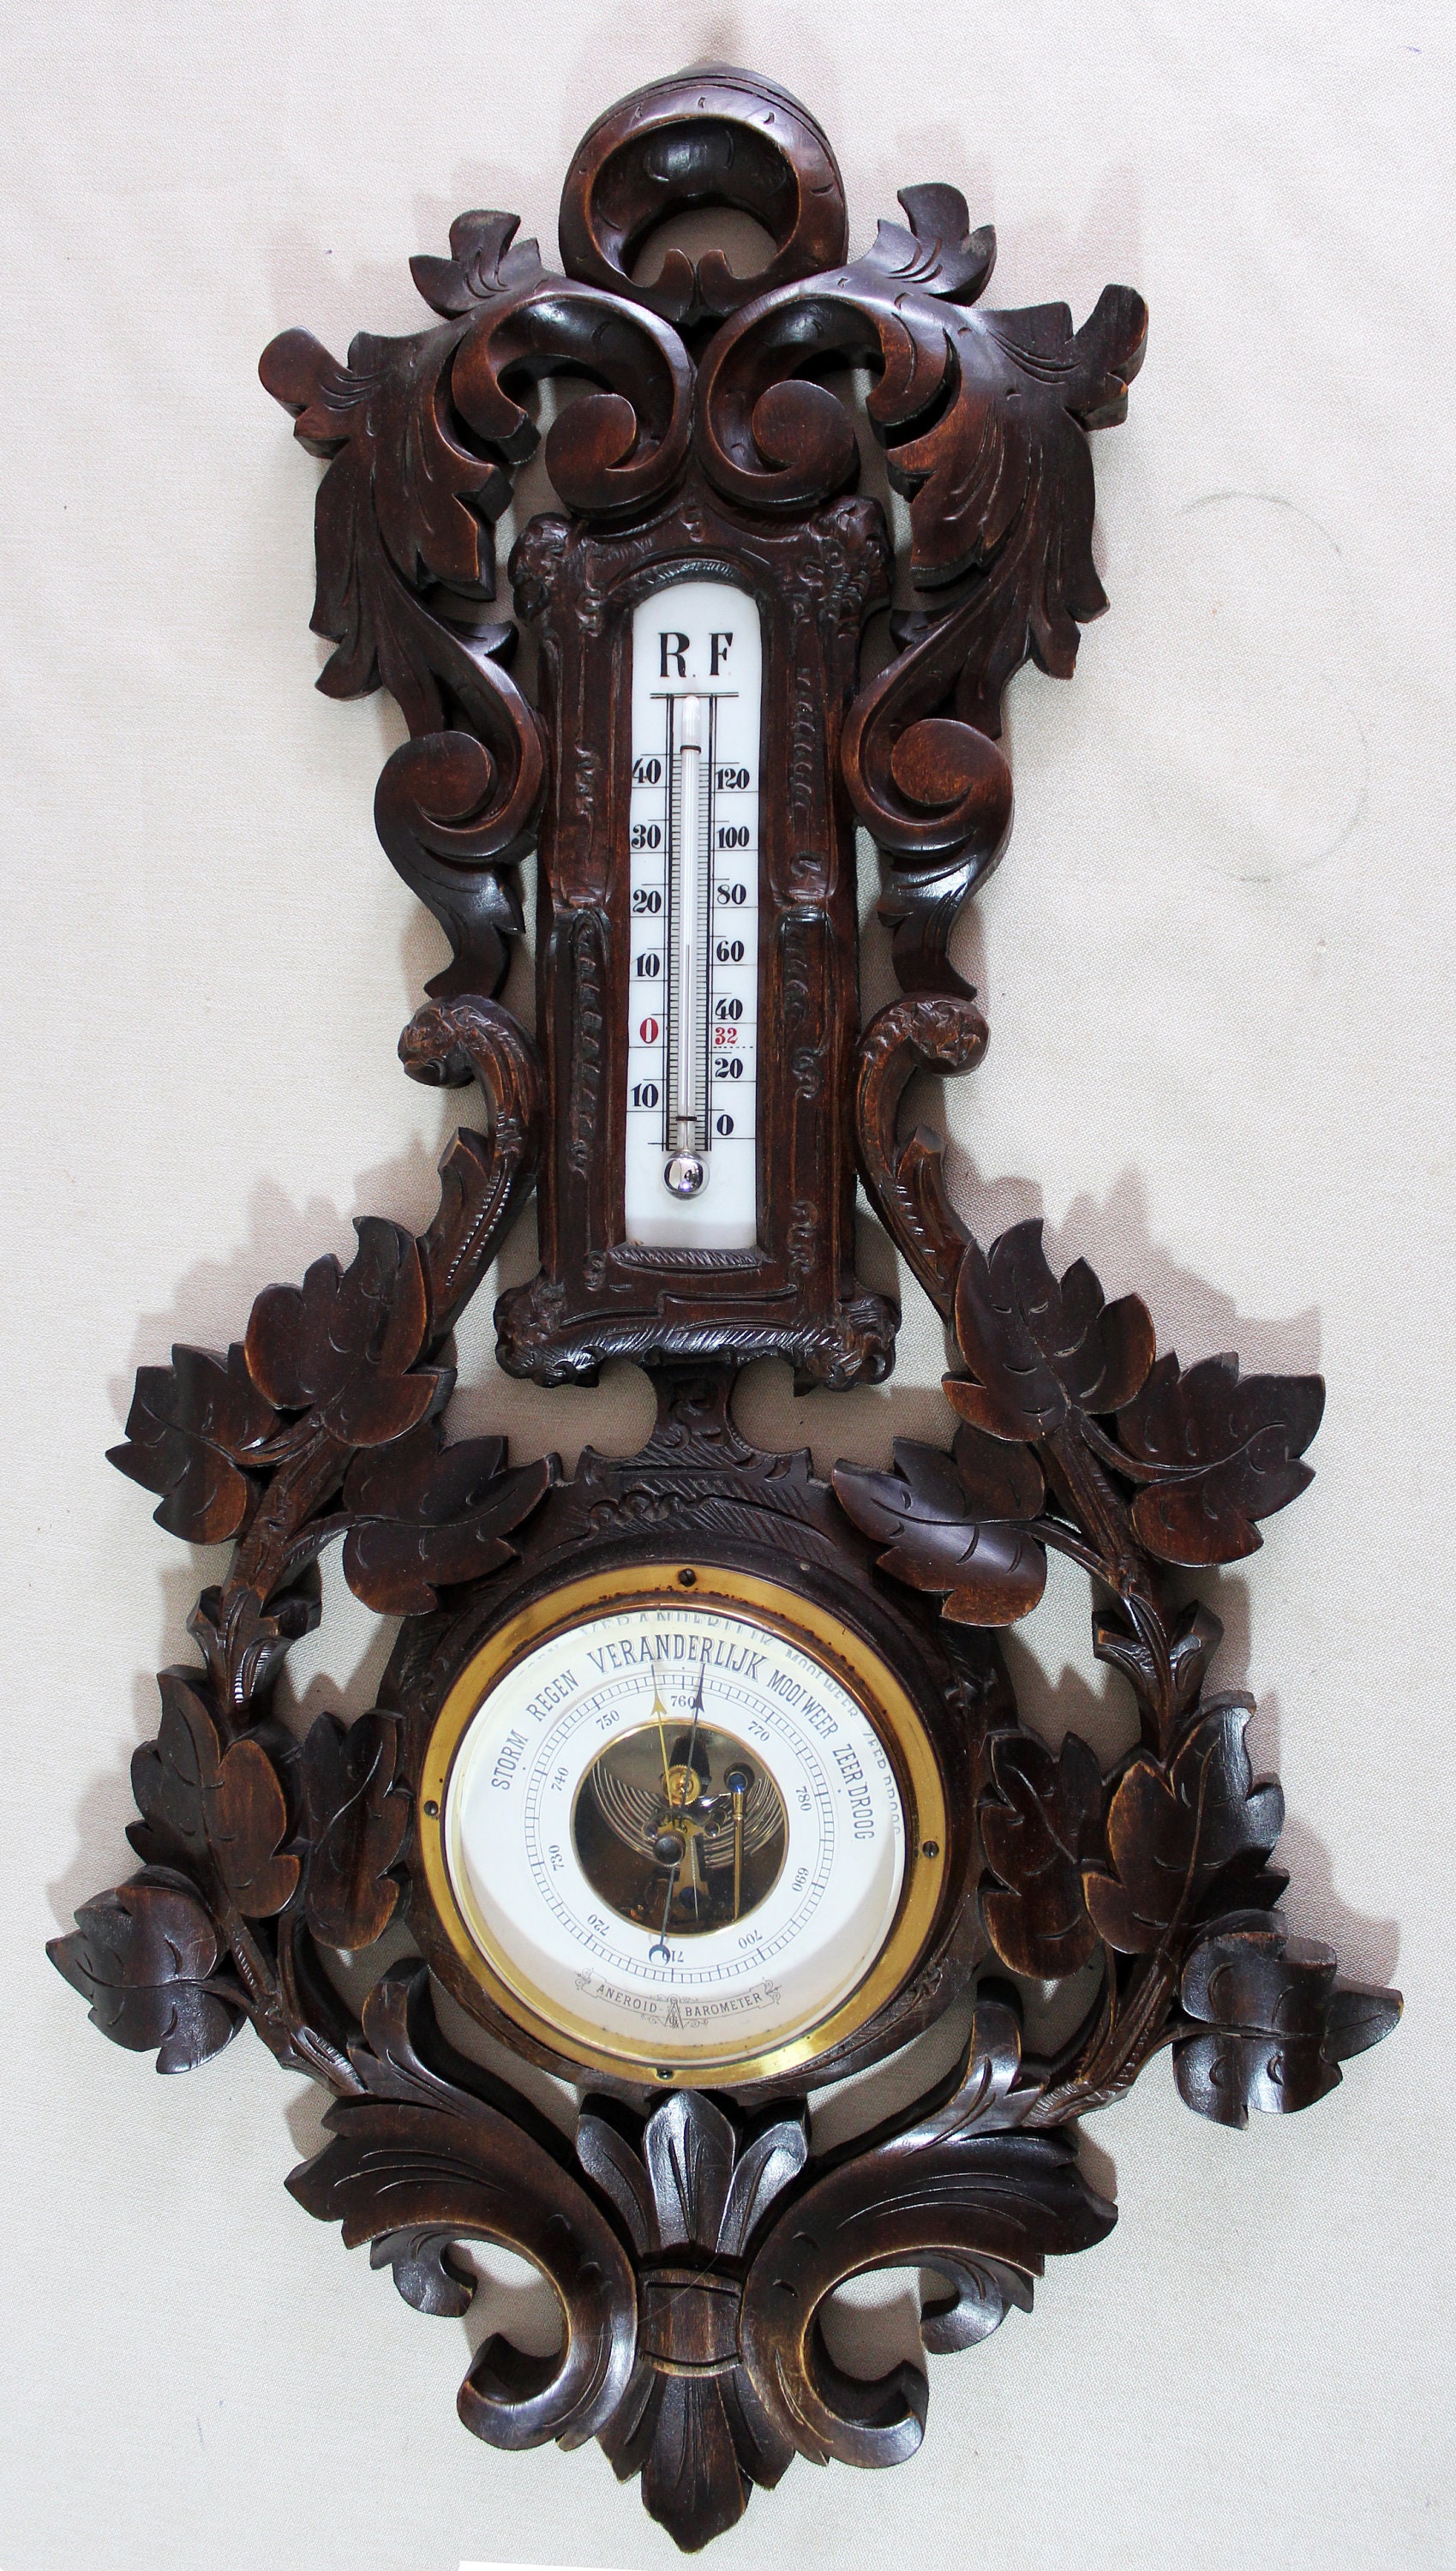 Climbing Ivy Indoor/Outdoor Wall Clock & Thermometer - French Bronze, Black Forest Decor